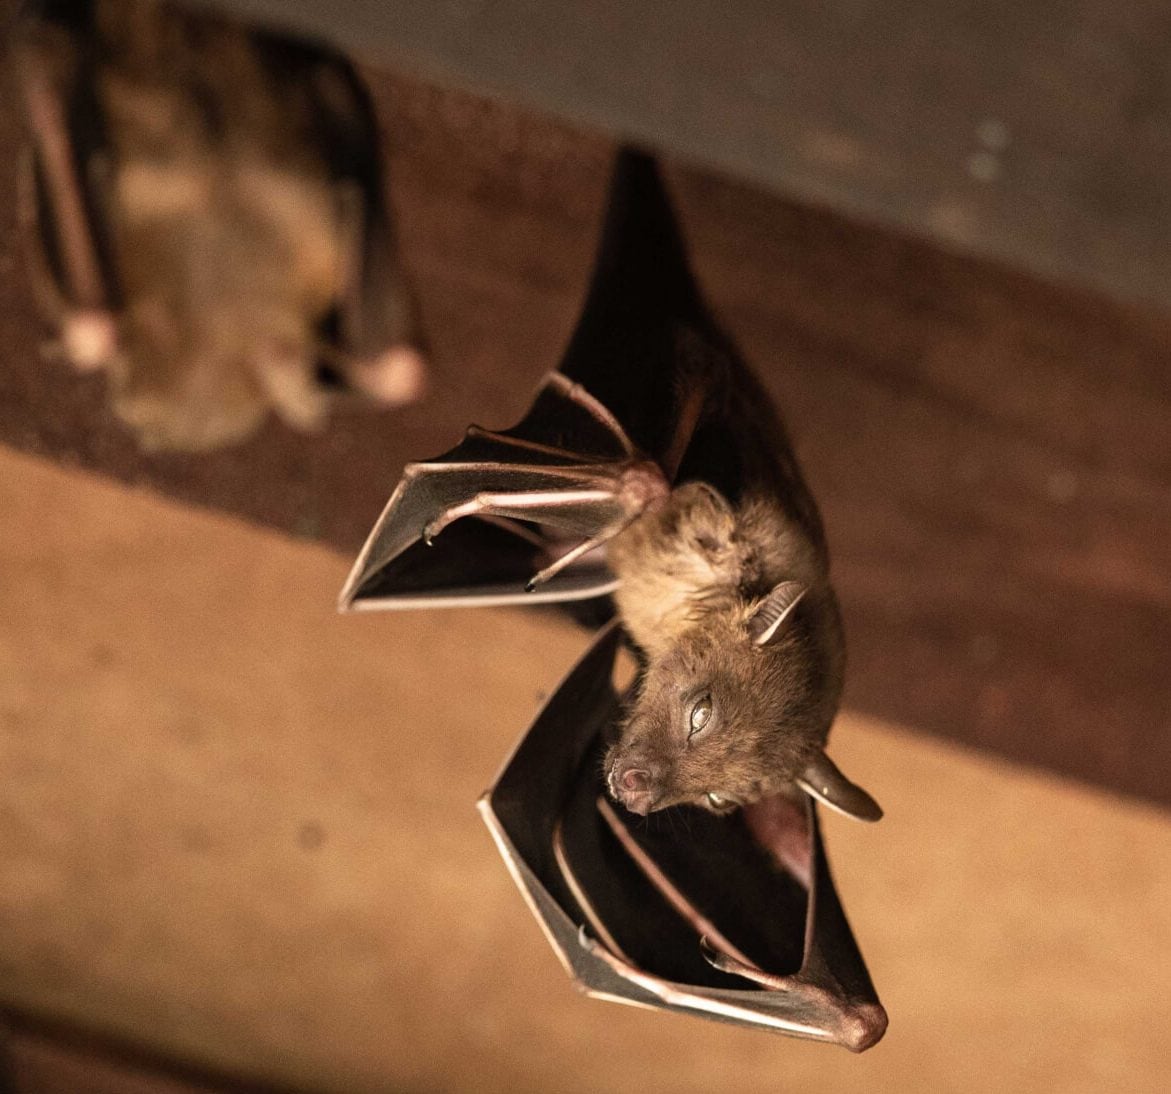 Expert bat removal services for a safe and humane solution in St. Louis